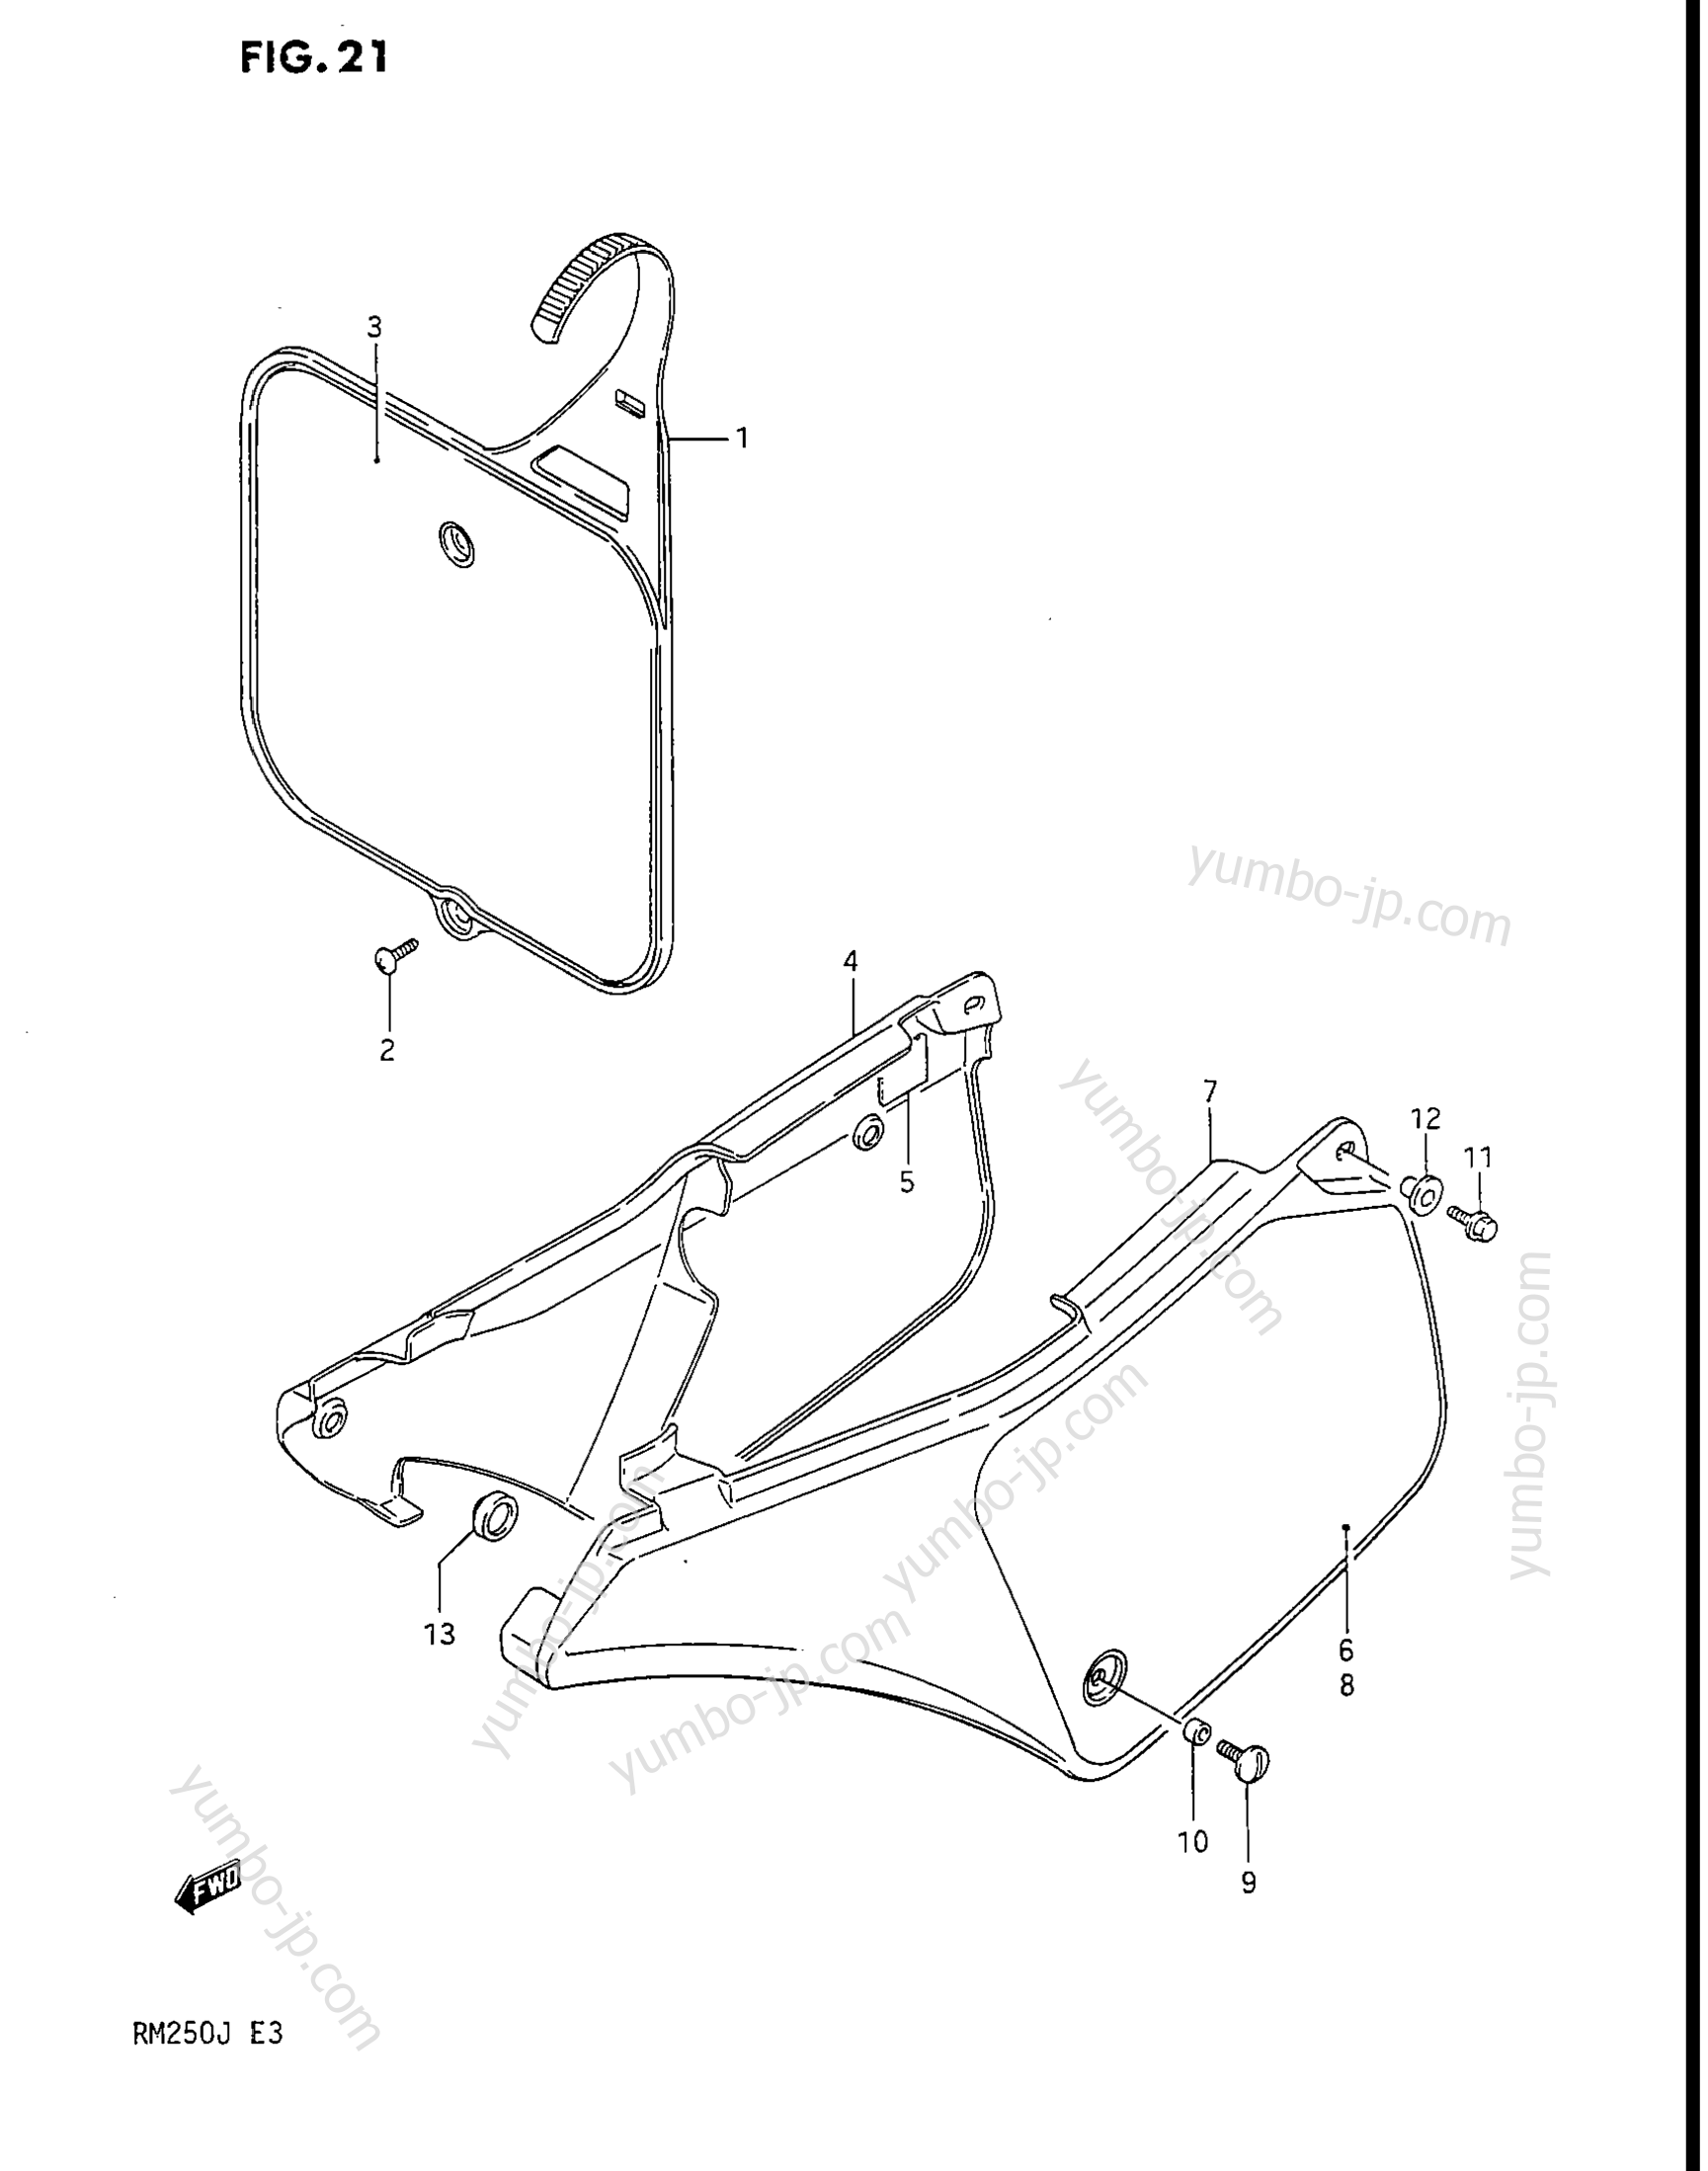 FRAME COVER for motorcycles SUZUKI RM250 1988 year